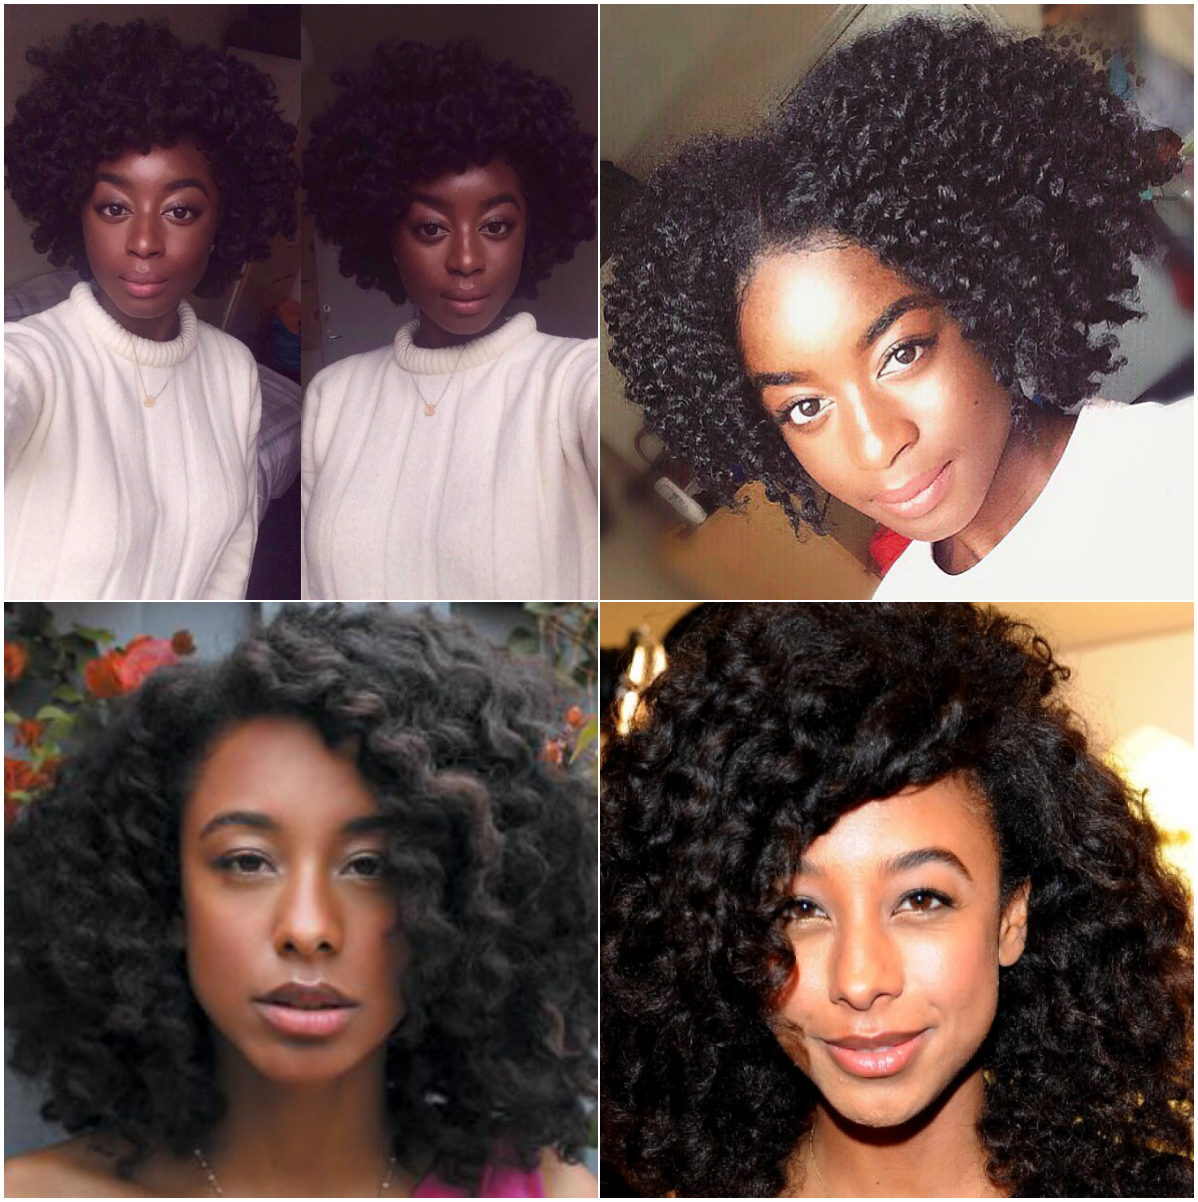 corinne bailey rae and shebnessa